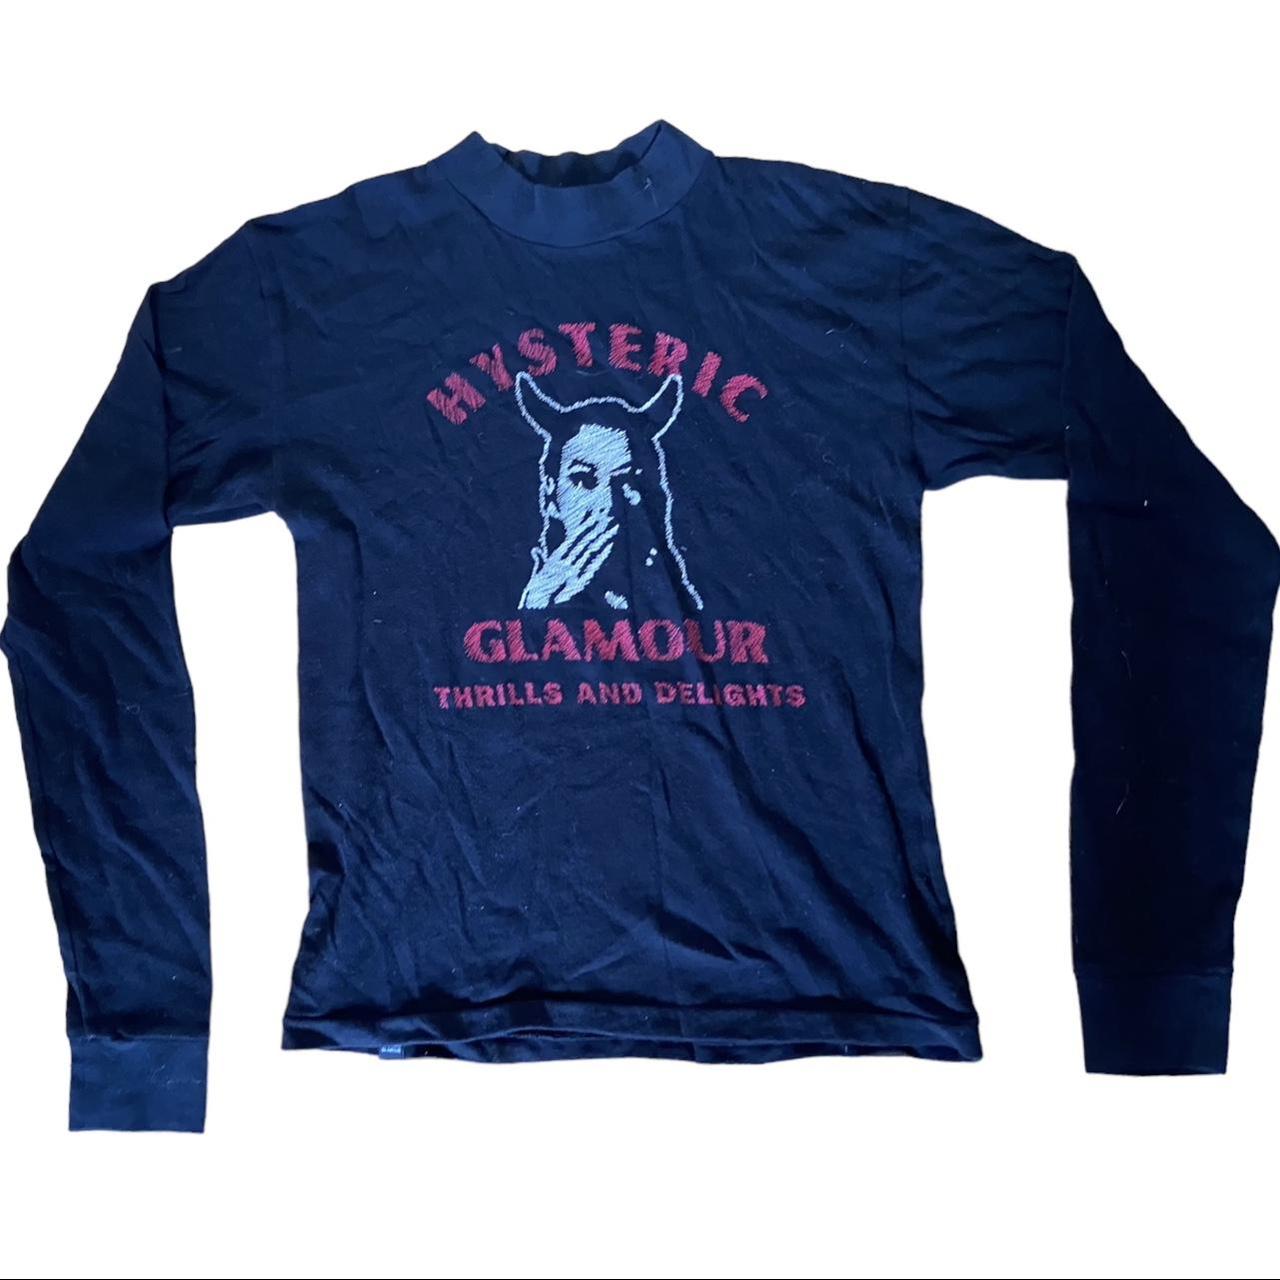 Hysteric Glamour THRILLS AND DELIGHTS long sleeve 🖤...